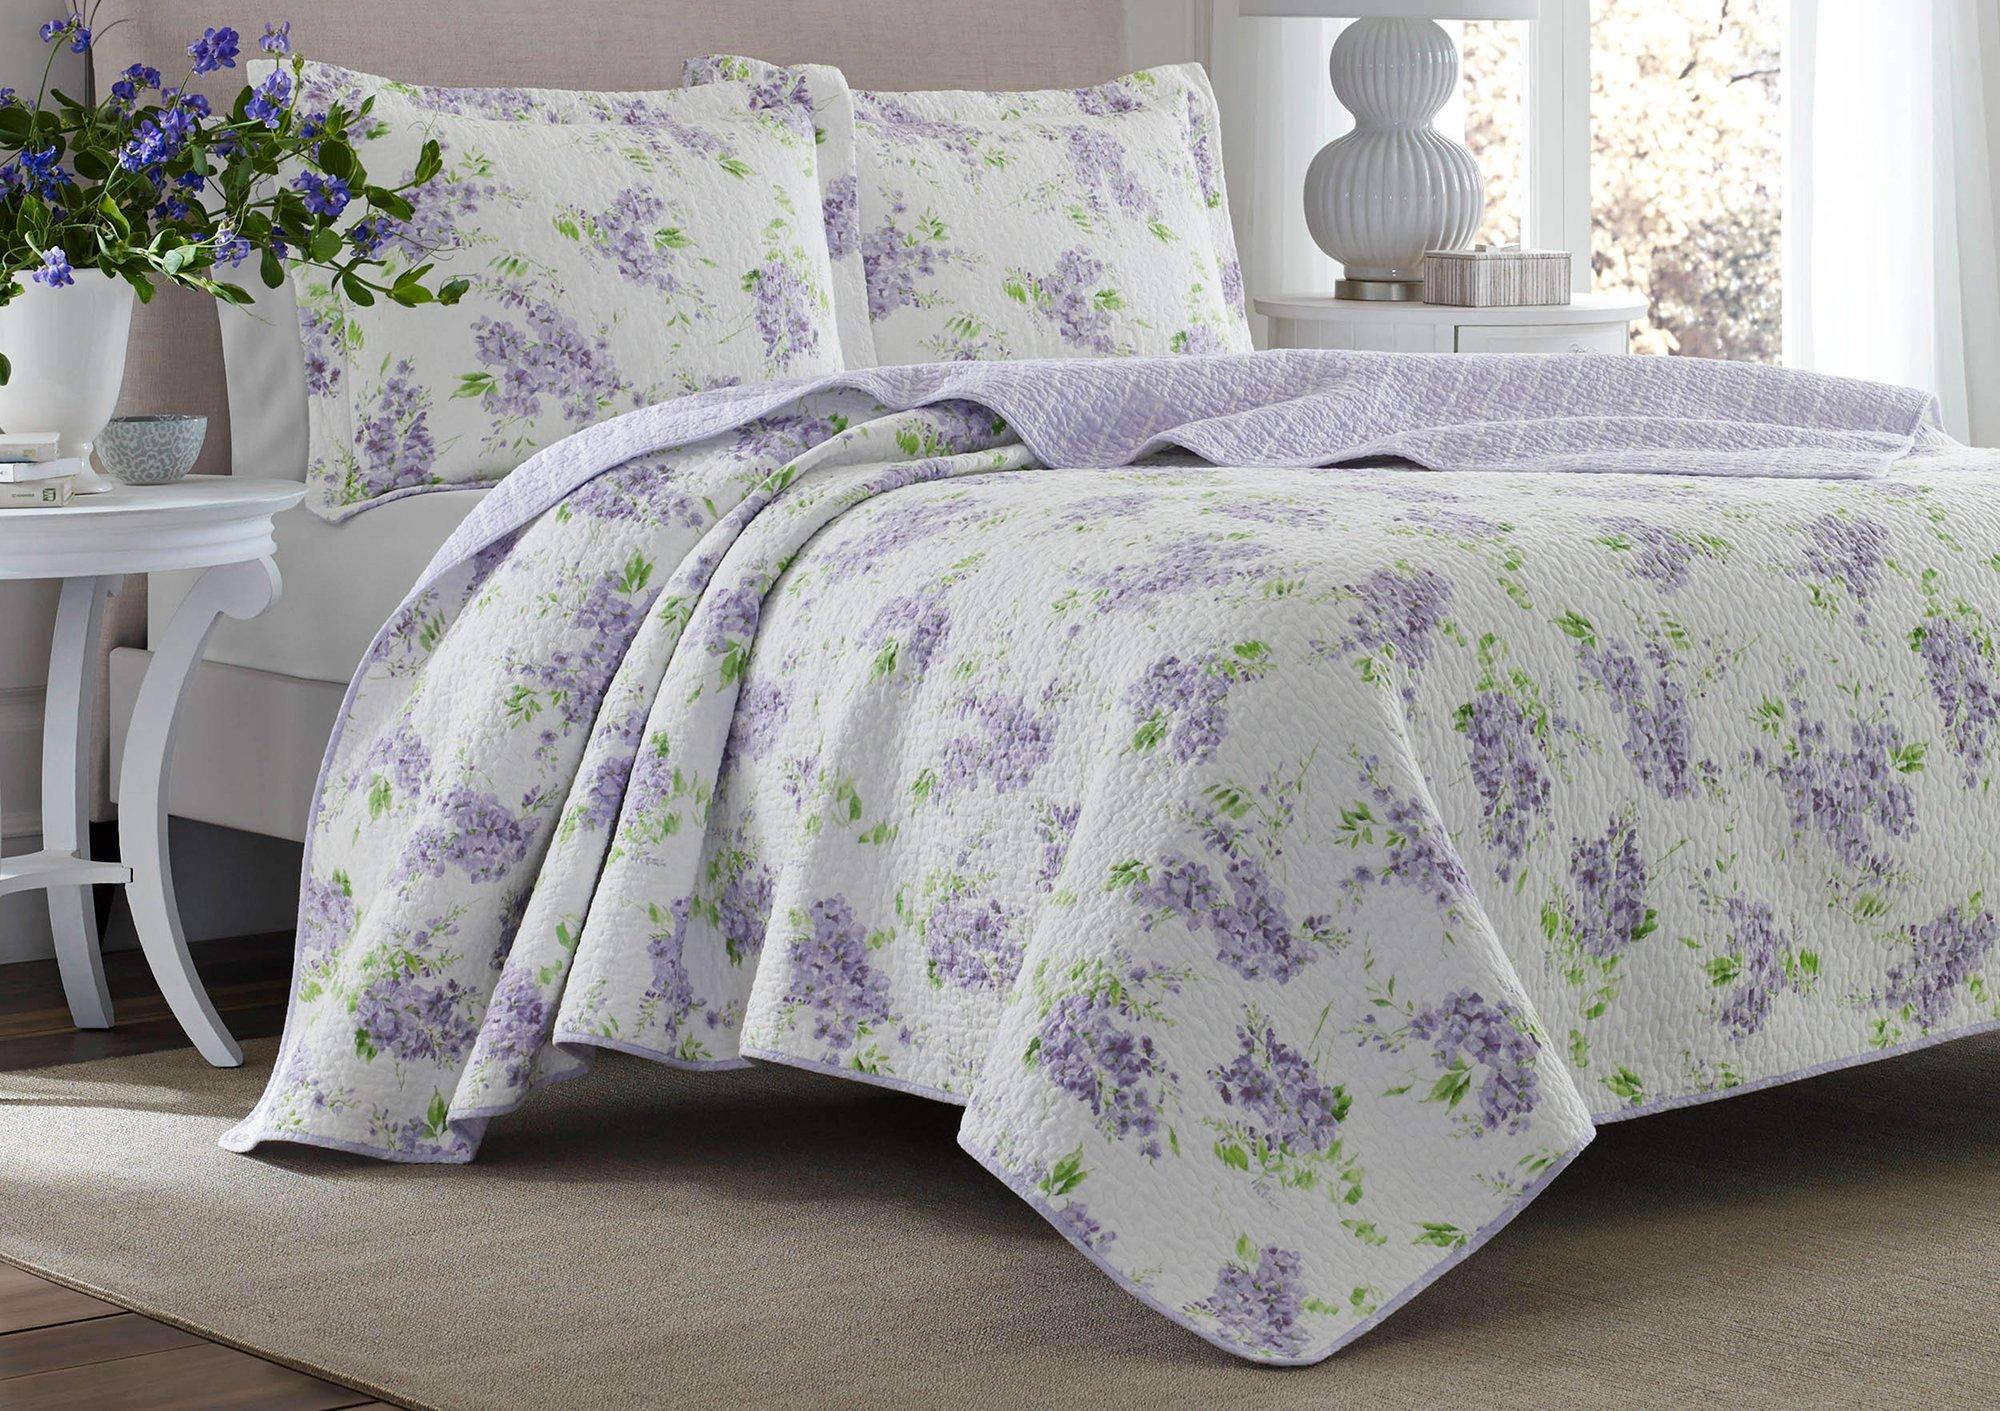 Laura Ashley Keighley Quilt Set